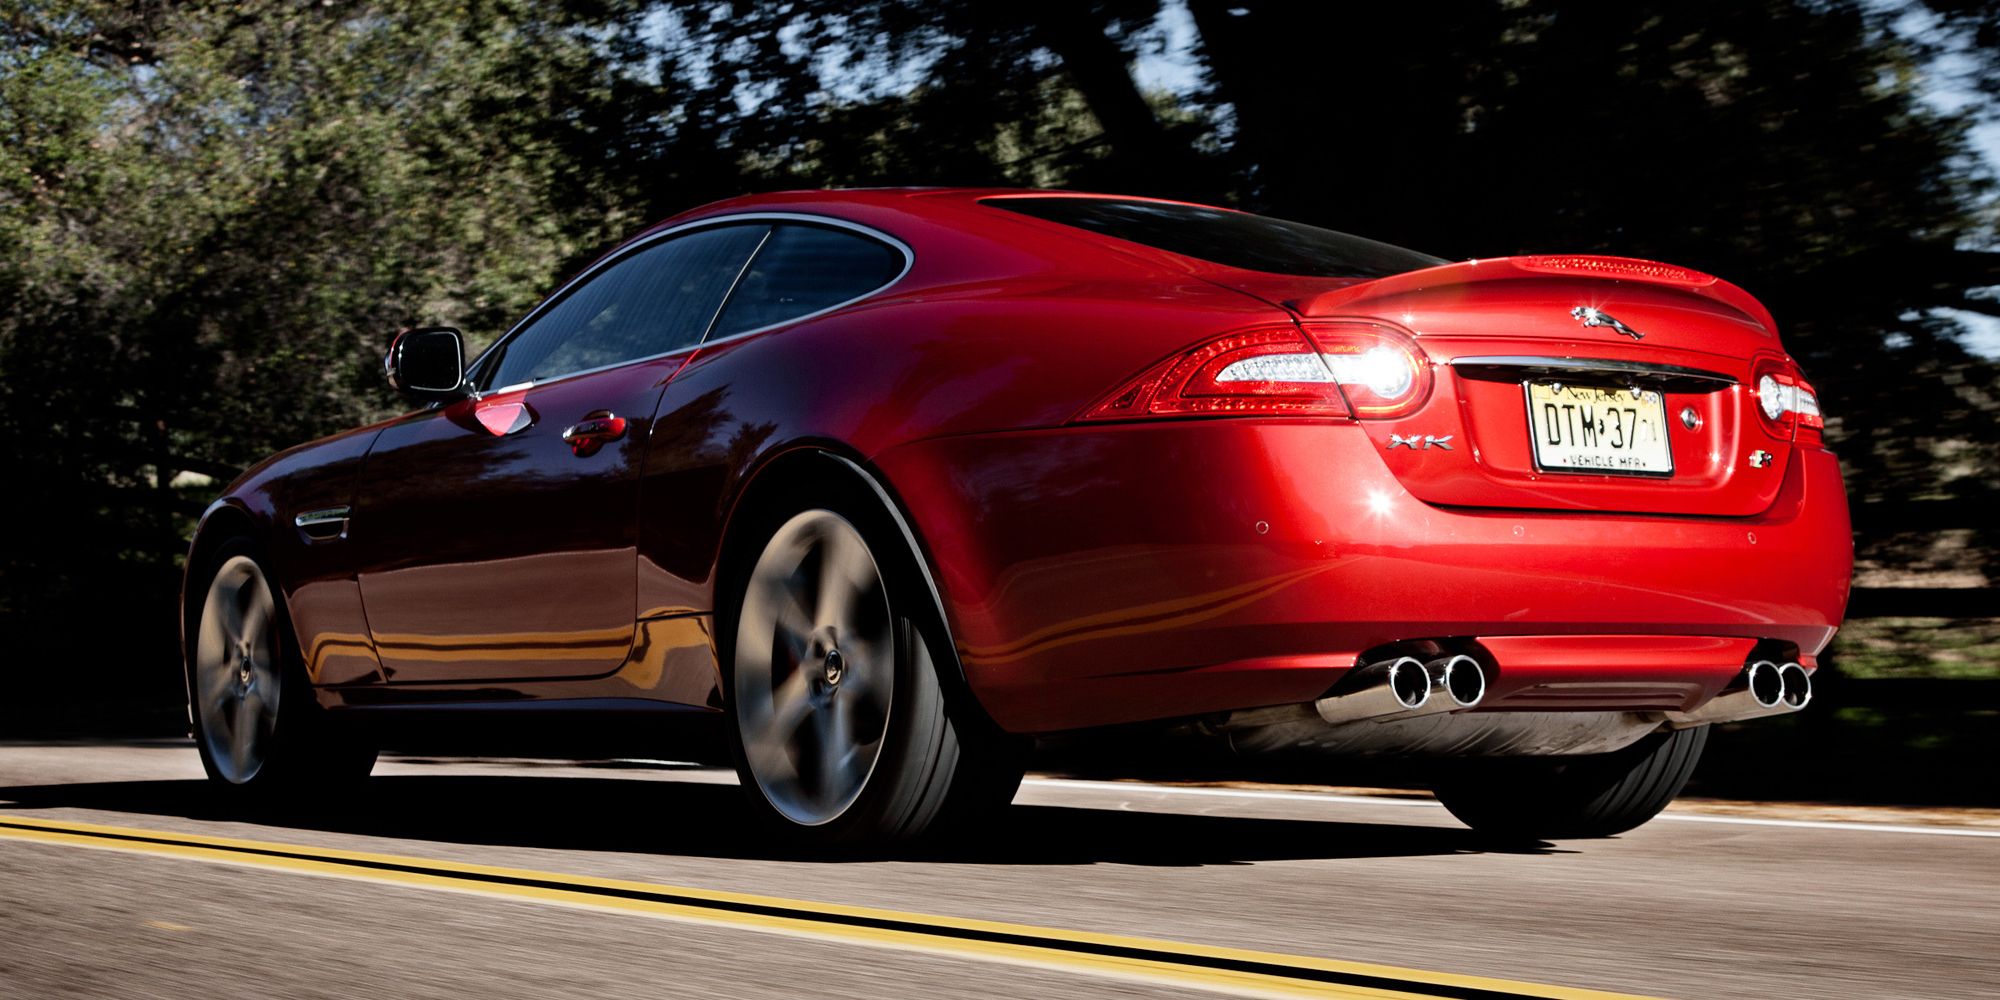 Rear 3/4 view of a red XKR on the move